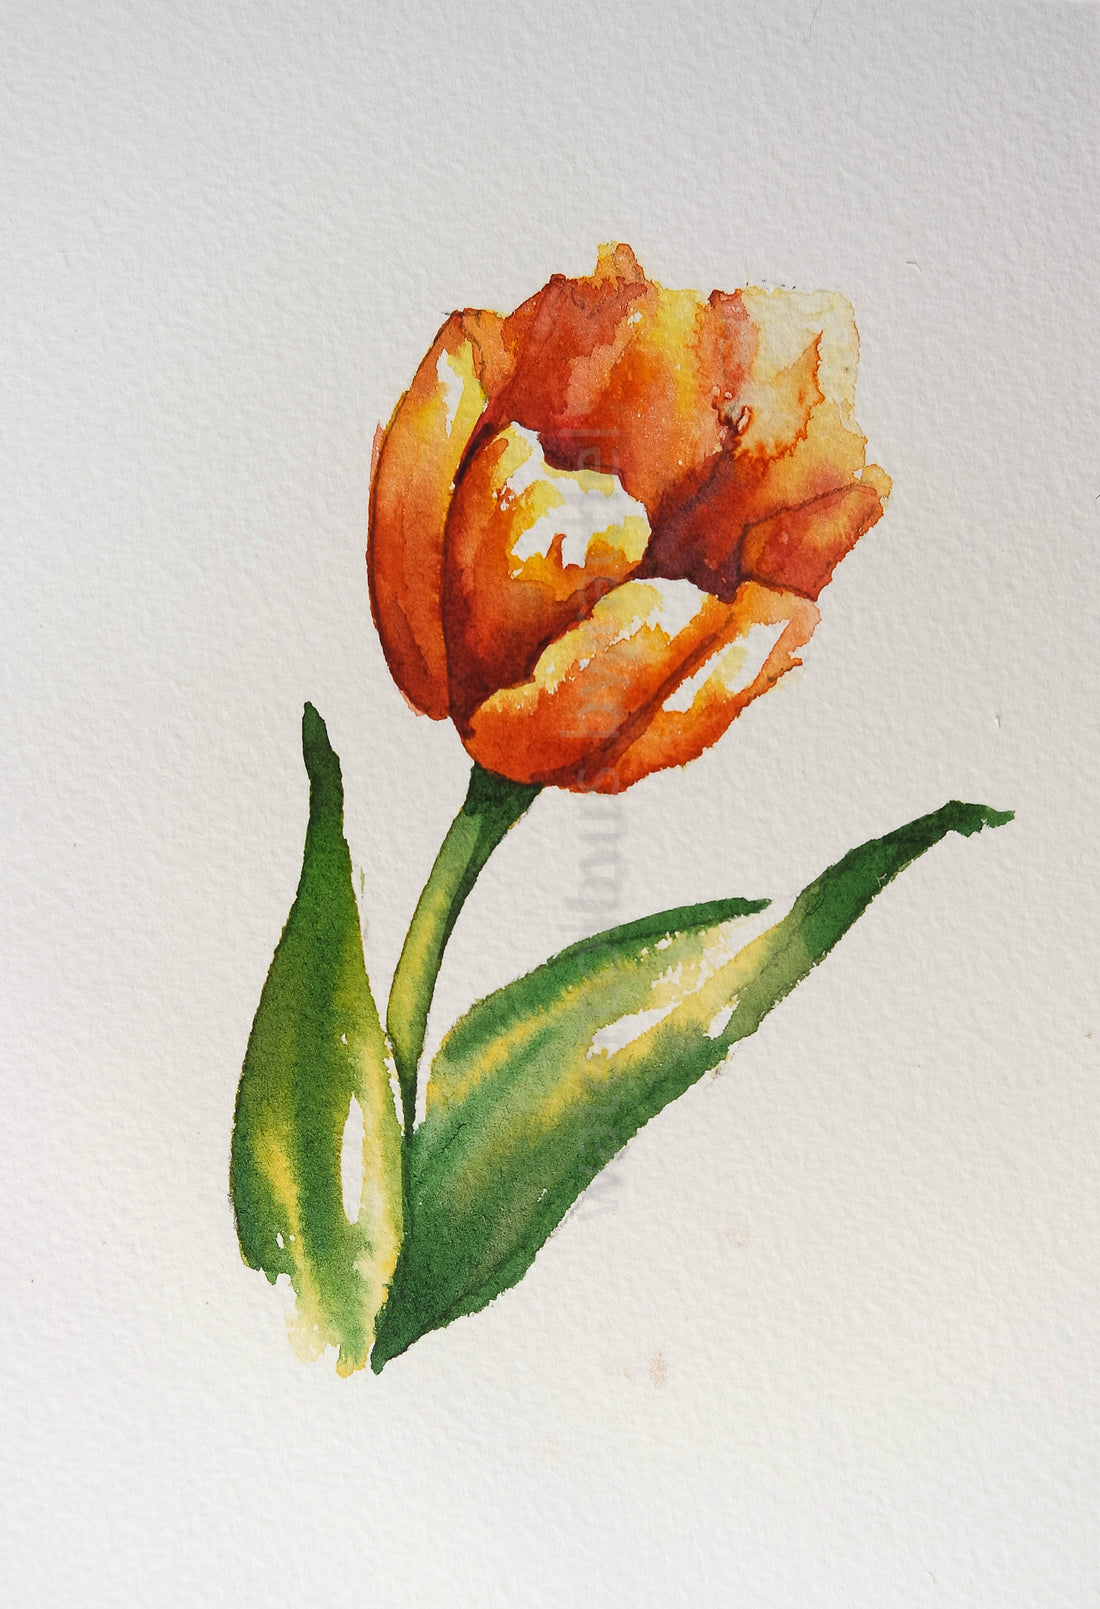 Dipping my brush back in the water   ( a simple tulip )